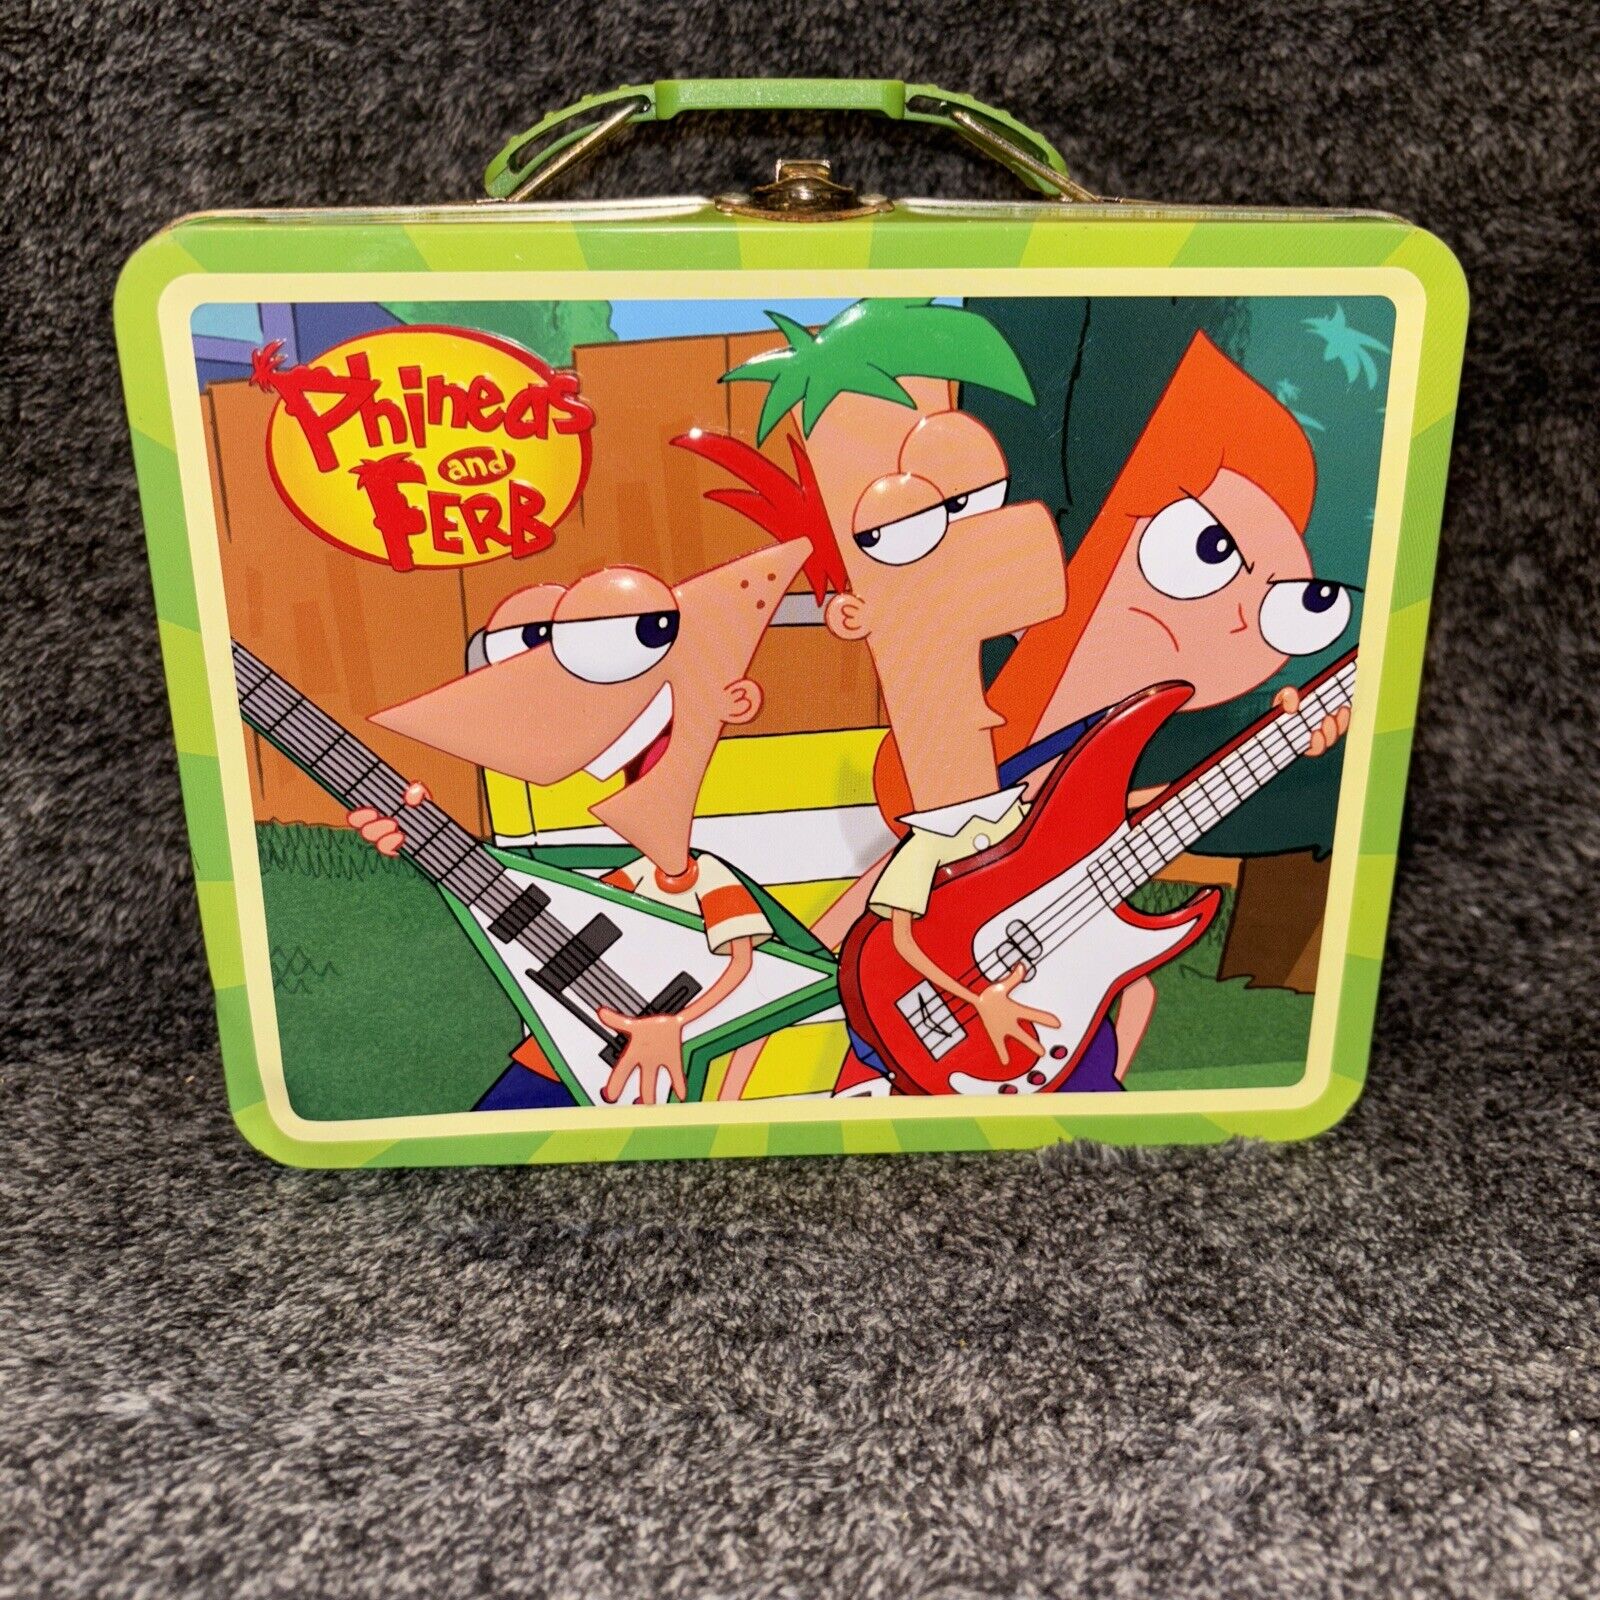 Disney Phineas And Ferb Guitar Hero Metal Lunch Box The Tin BOX Company